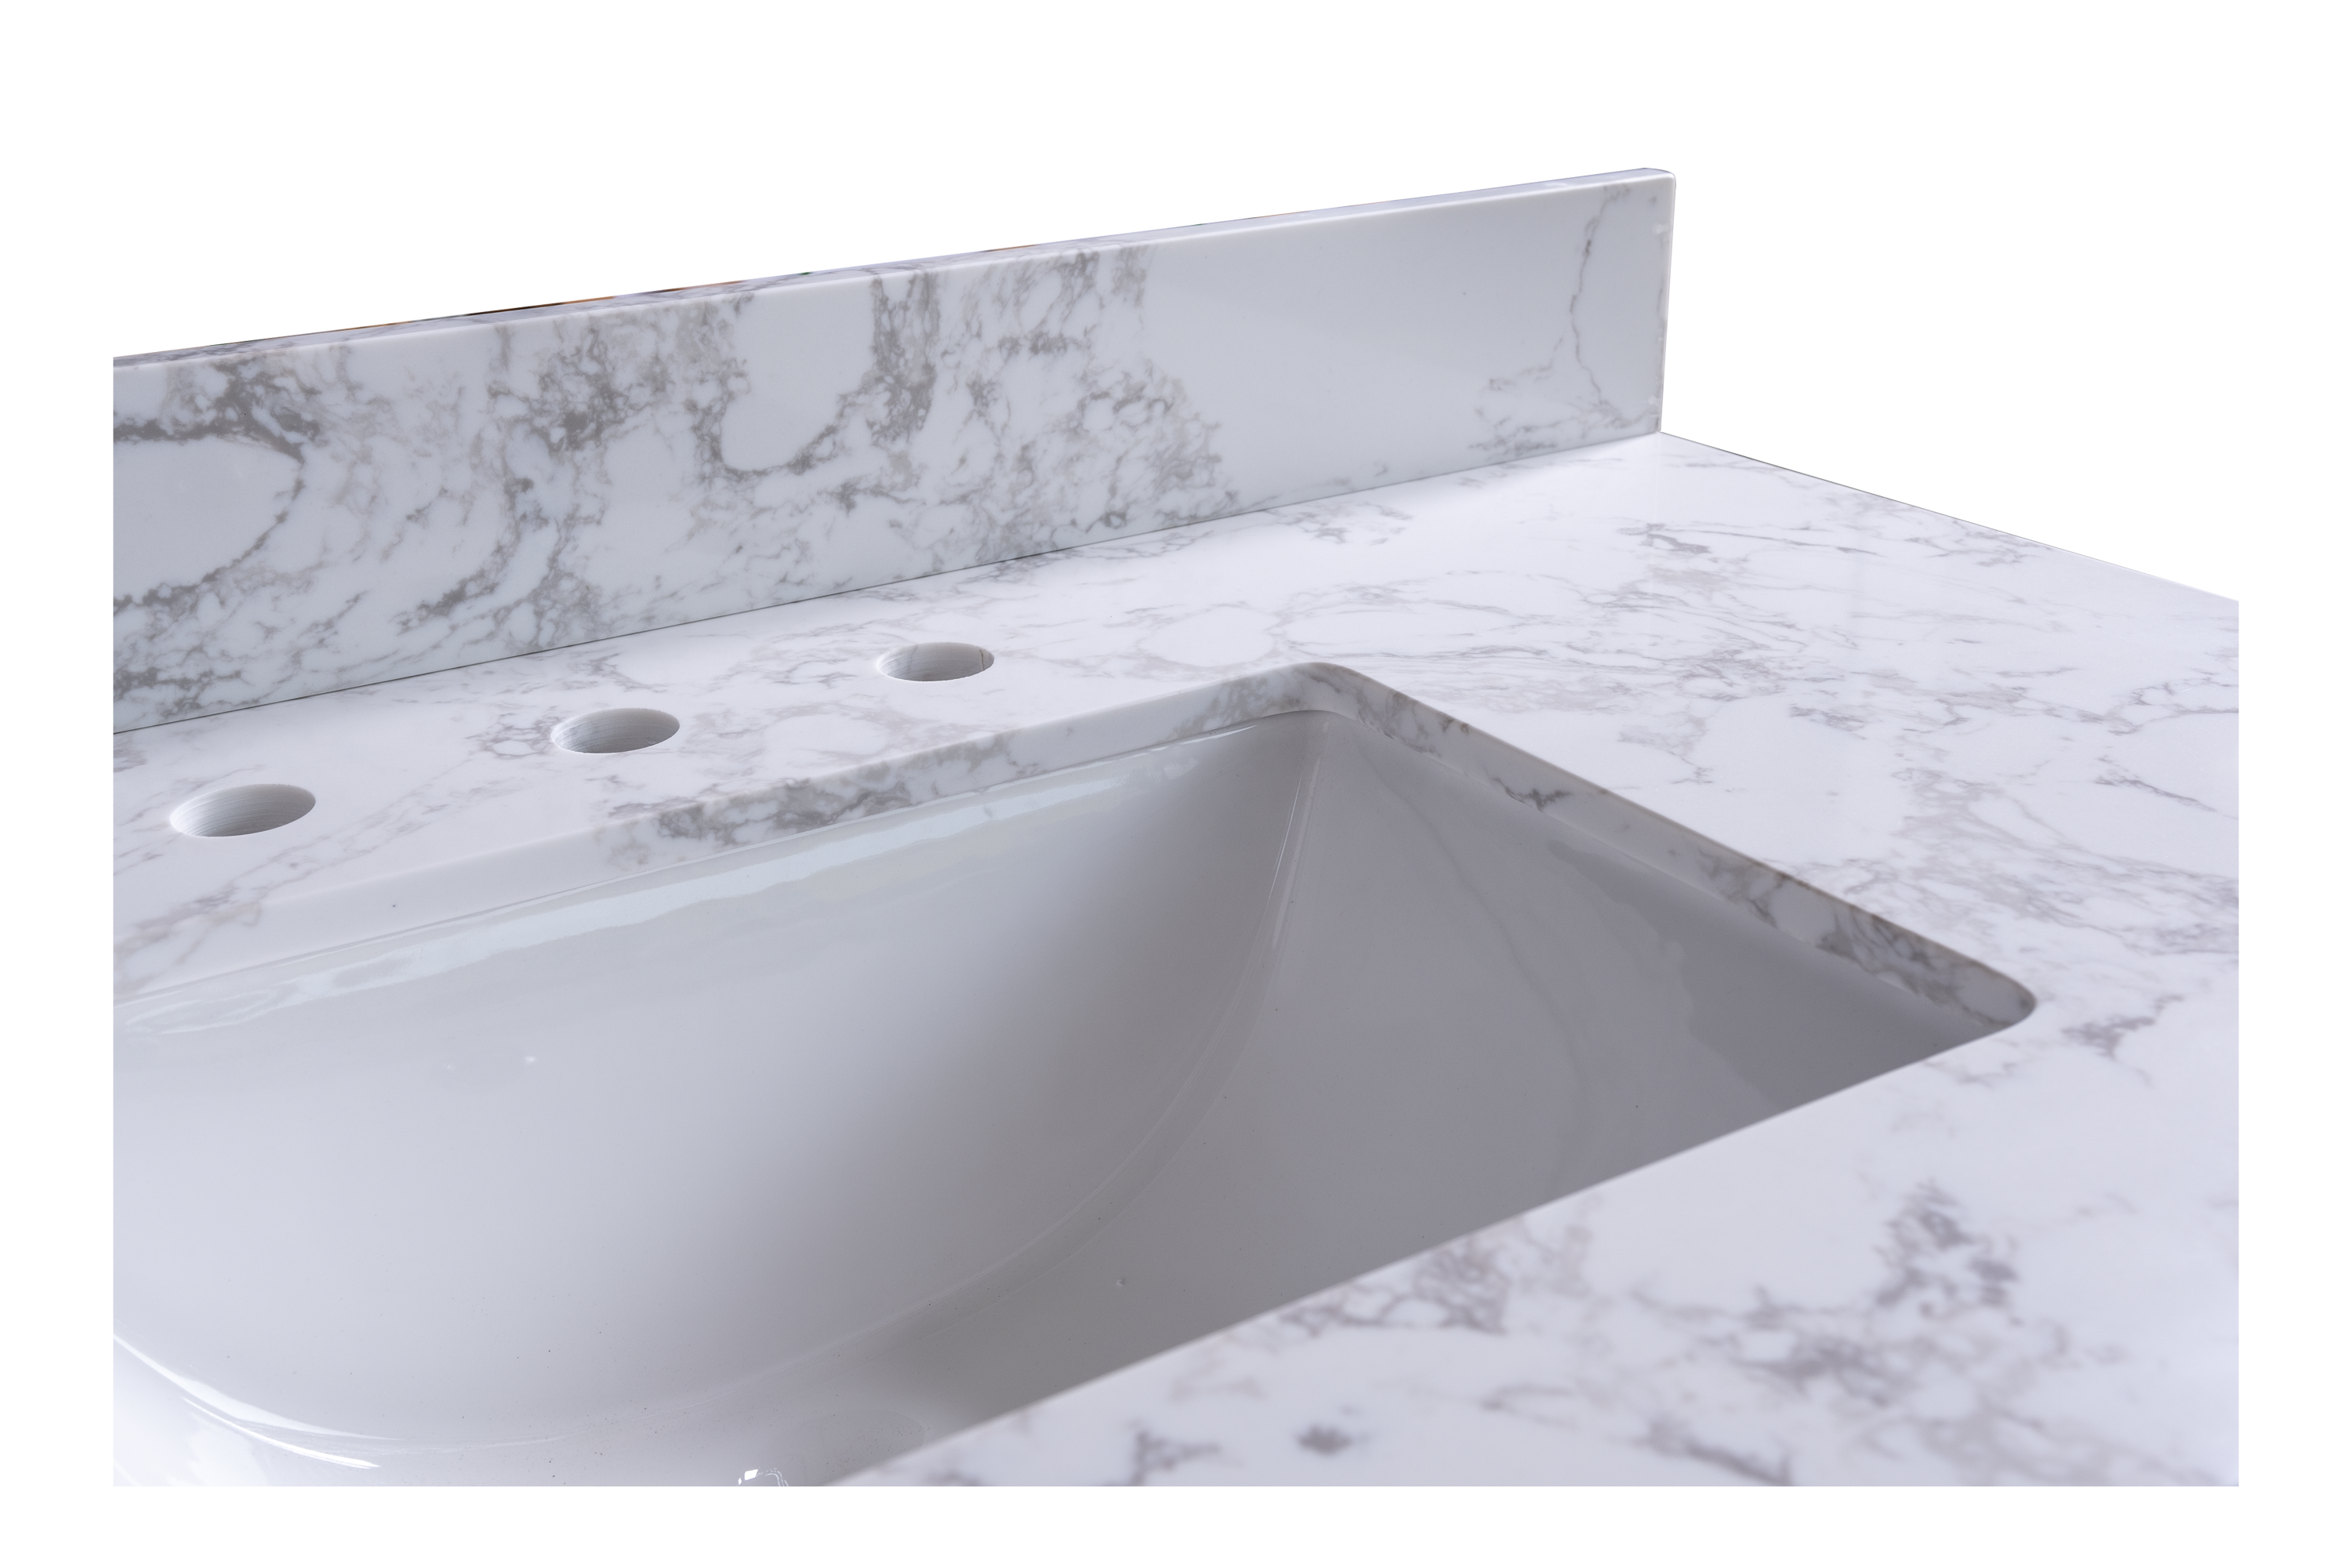 49" x 22" bathroom stone vanity top  engineered stone carrara white marble color with rectangle undermount ceramic sink and 3 faucet hole with back splash